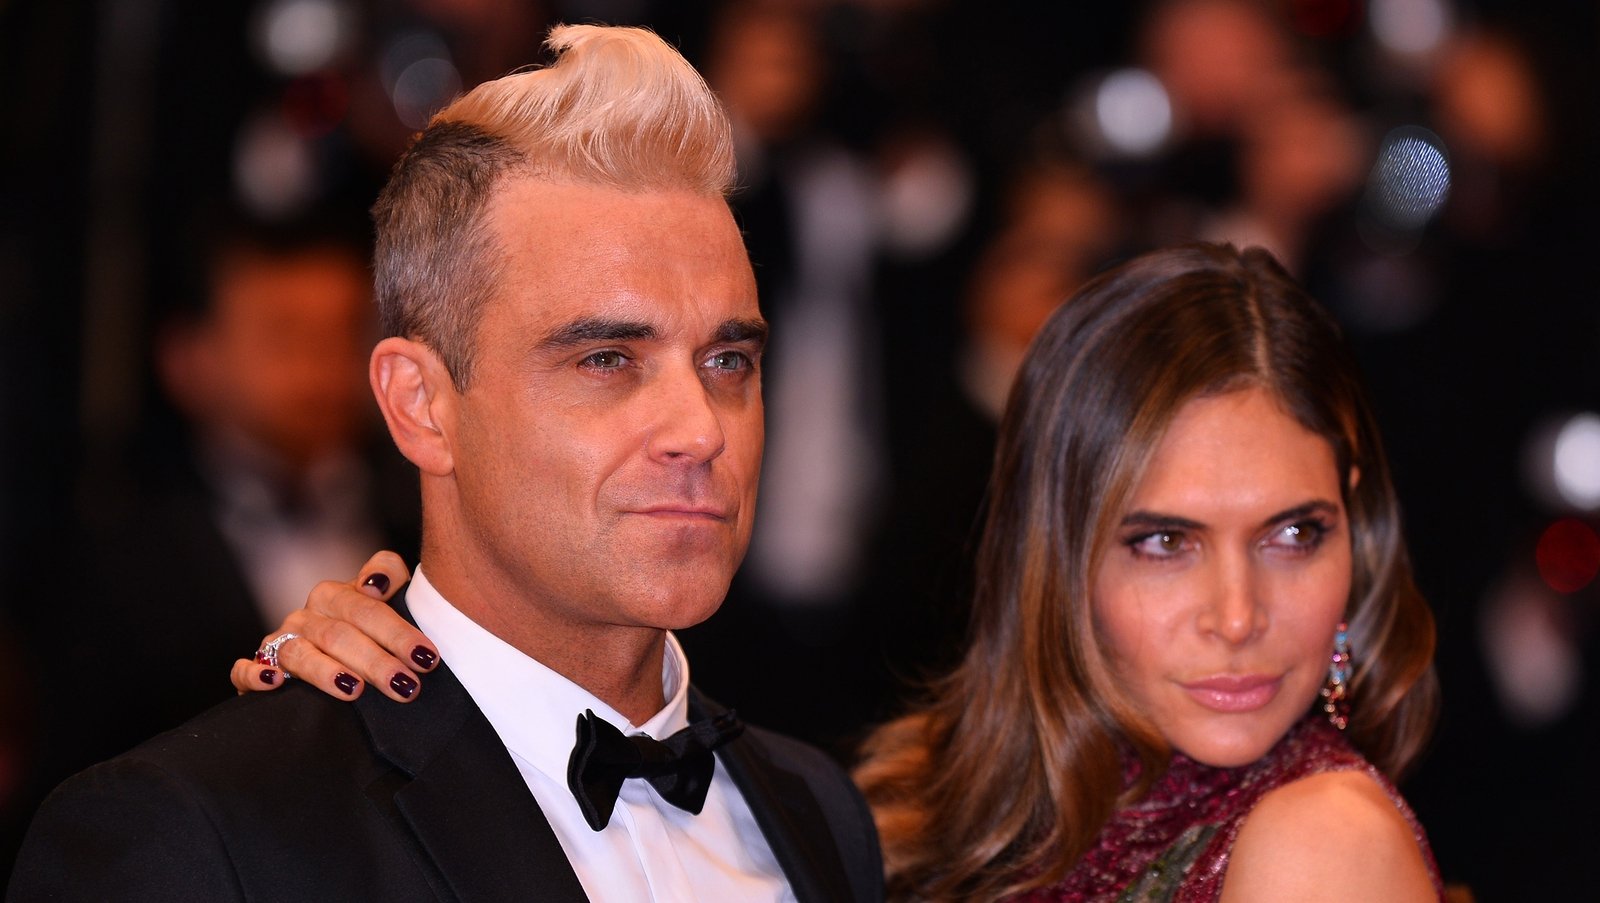 Robbie Williams And Wife Ayda Field To Judge X Factor